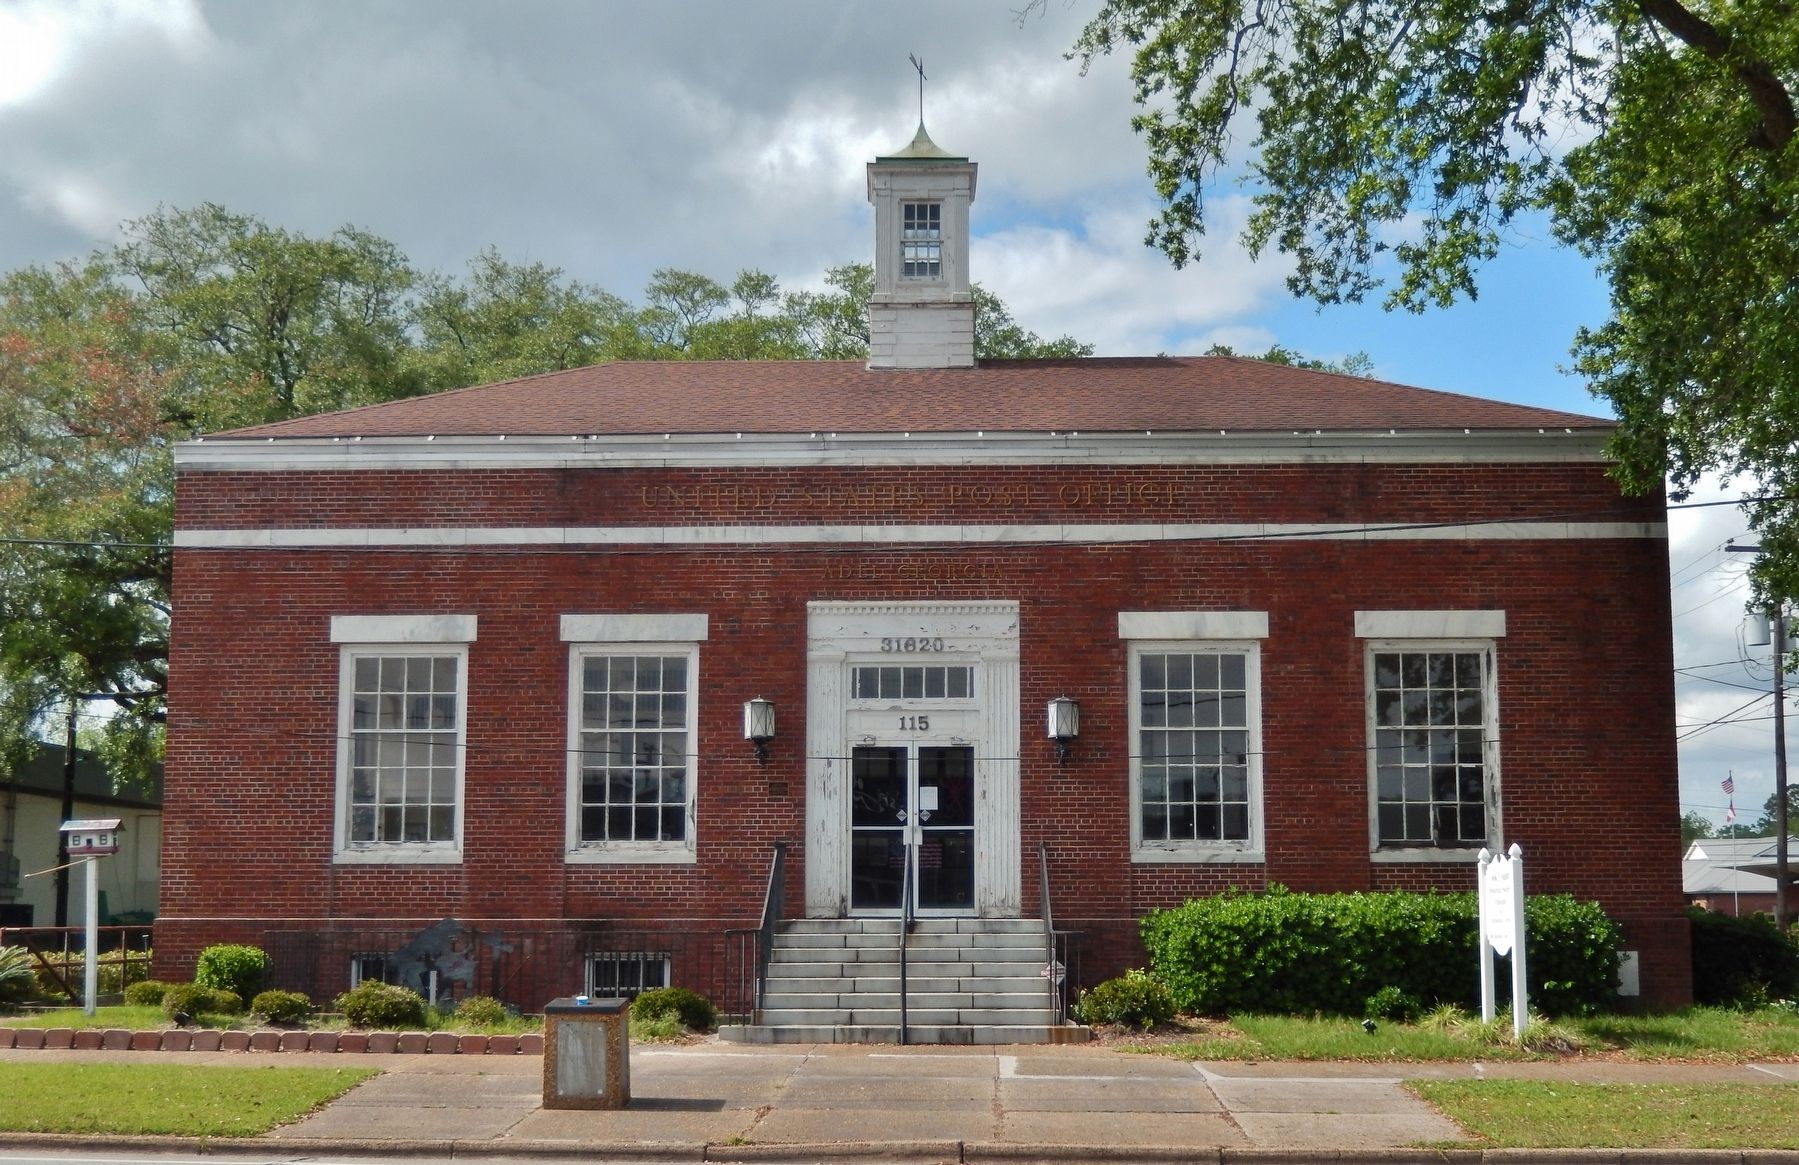 Old United States Post Office, Adel (<i>south/front elevation</i>) image. Click for full size.